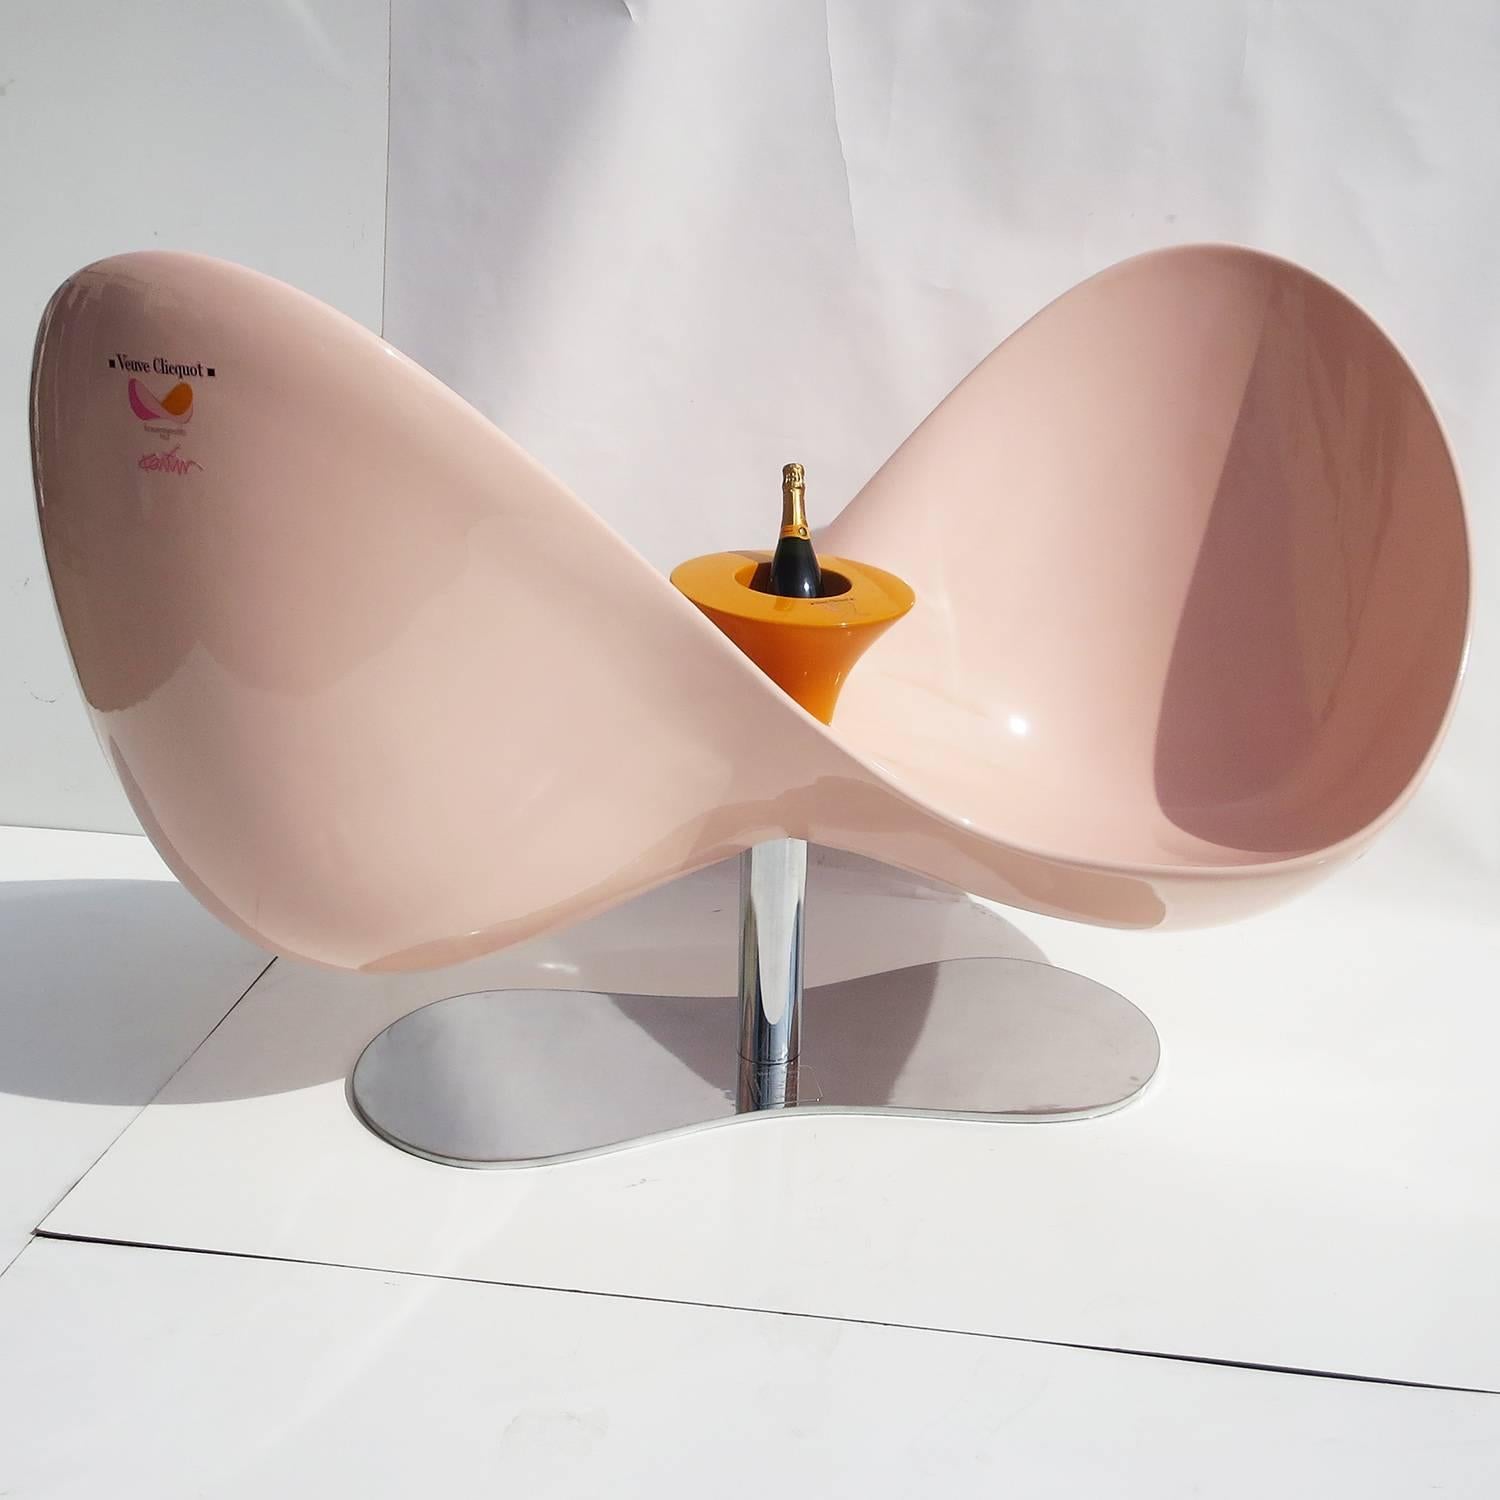 The "Loveseat" designed by Karim Rashid, was produced in Milan in a limited edition of 120 in 2007. Made in conjunction with Veuve Clicquot champagne, the sculptural seats sold out immediately, with an original price tag of $10,000. The